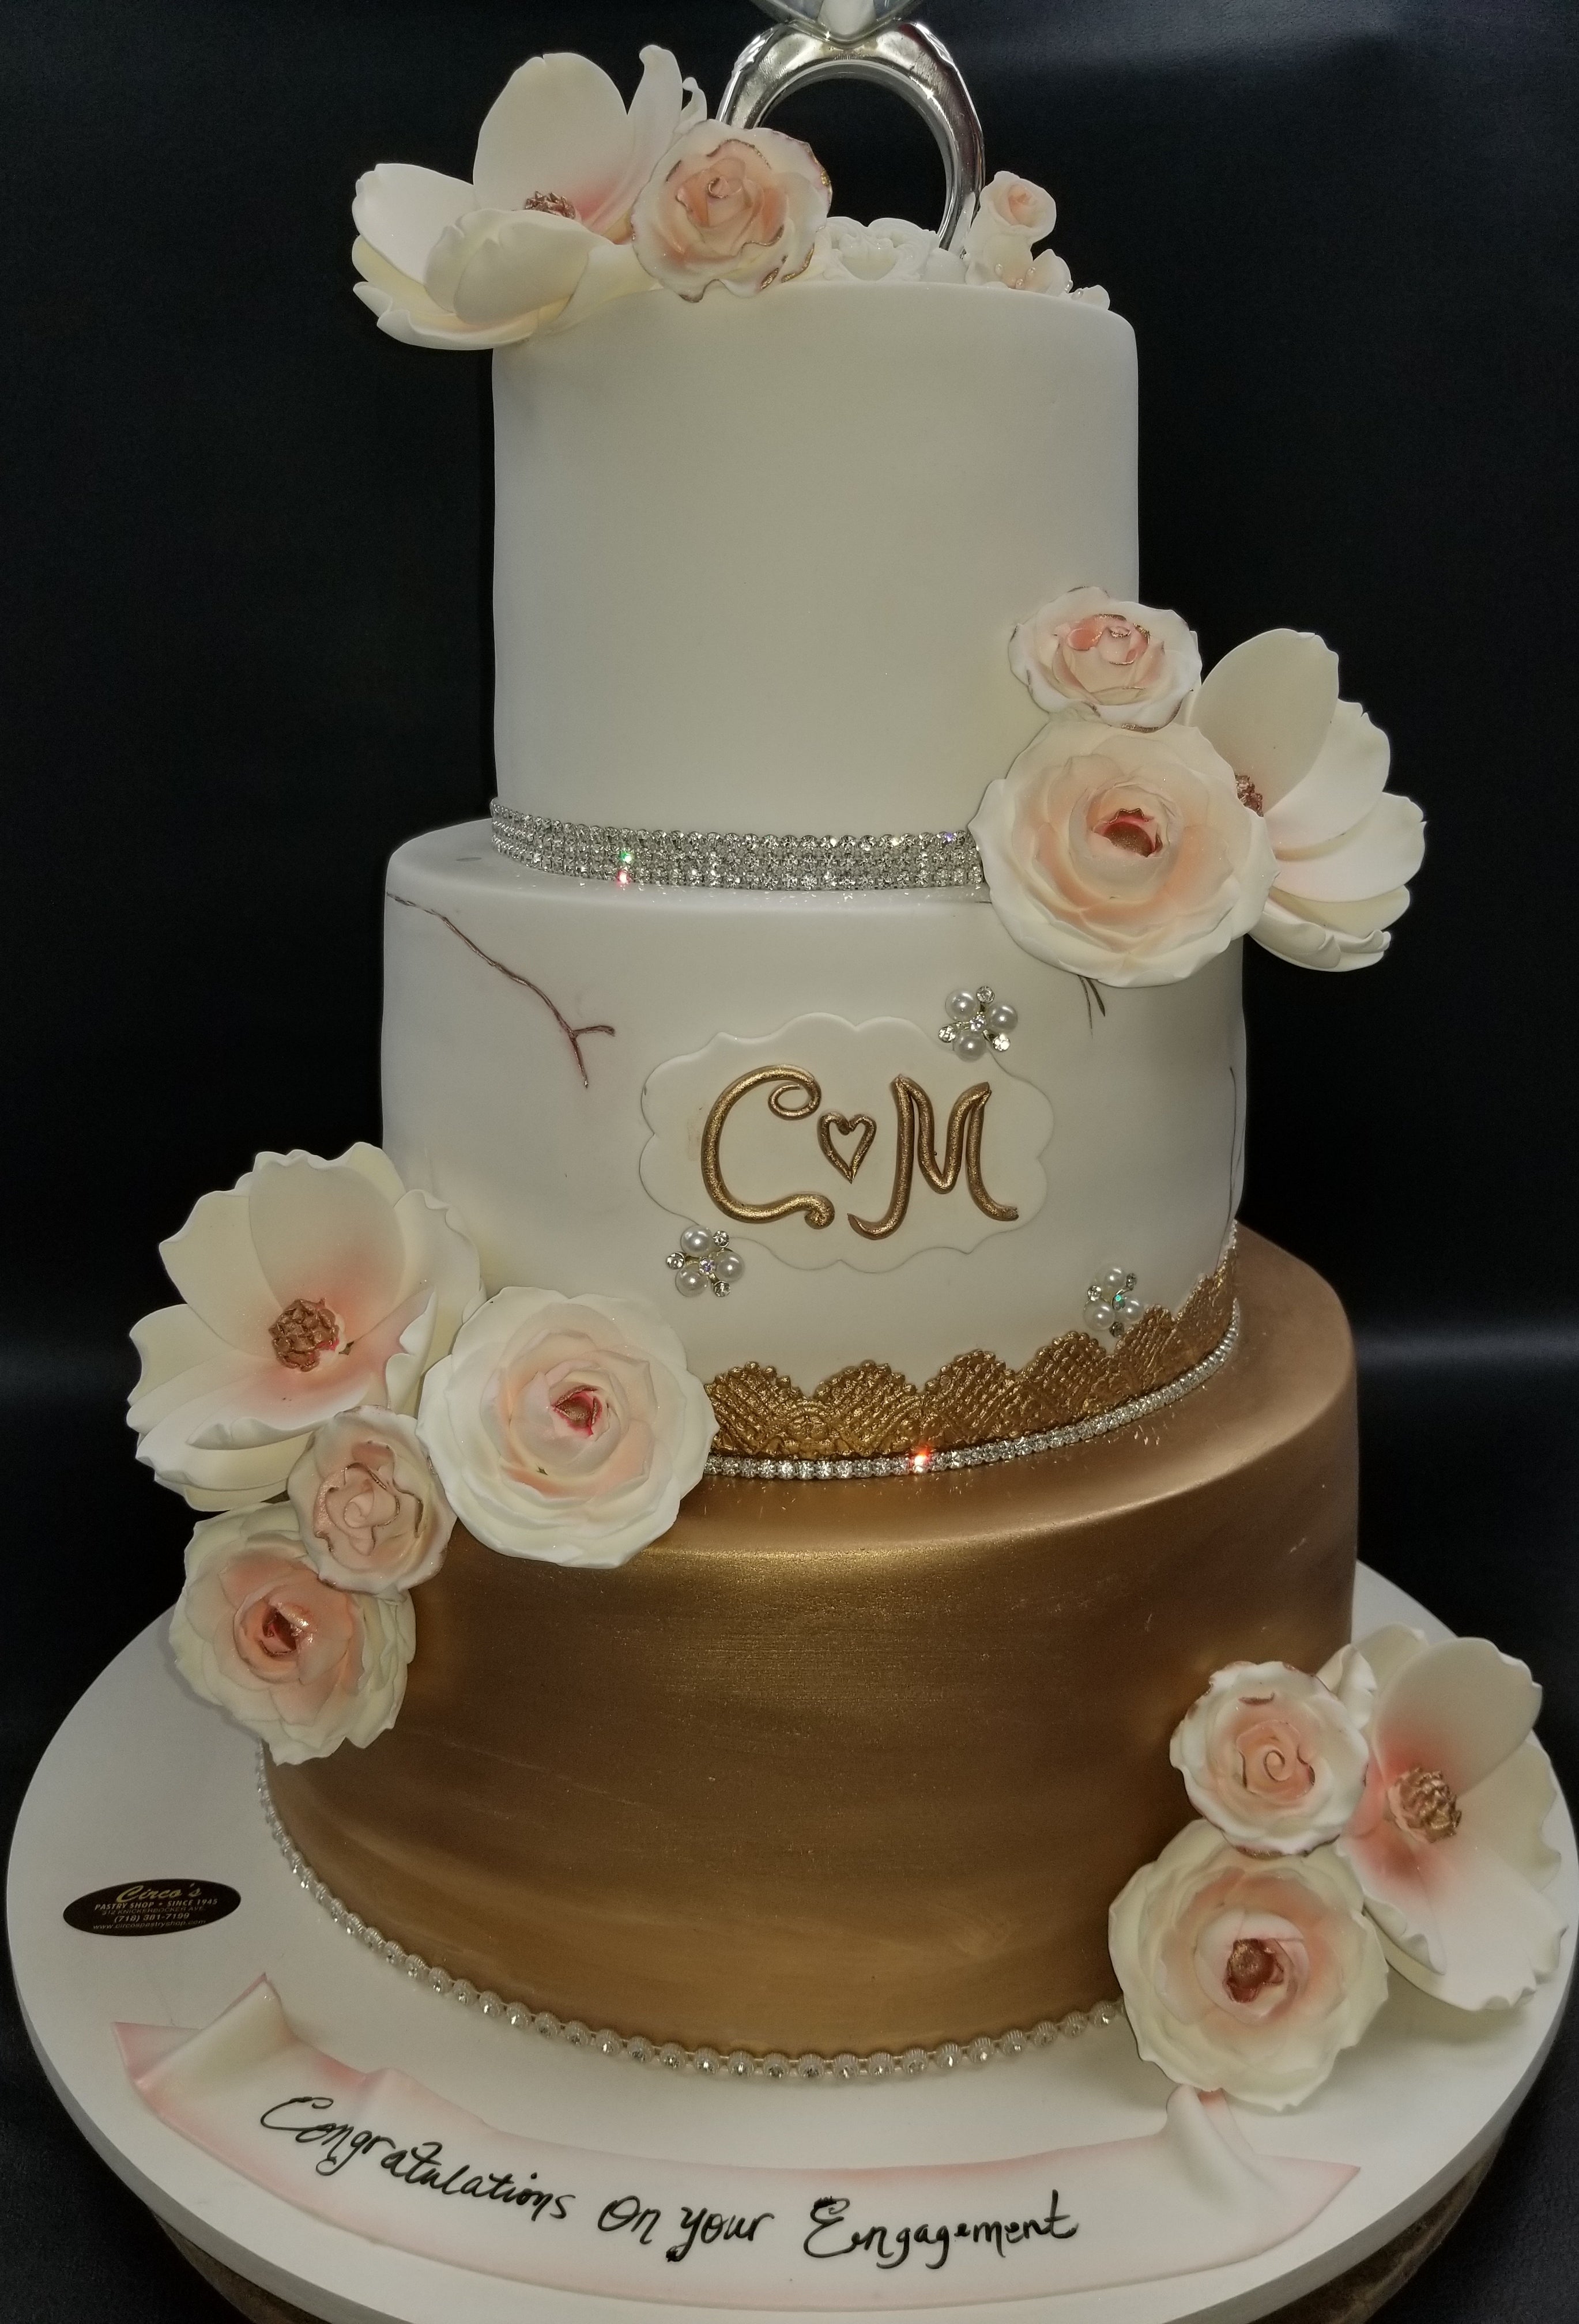 Mr & Mrs Engagement Cake | Couple Gifts | Mio Amore – Mio Amore Shop